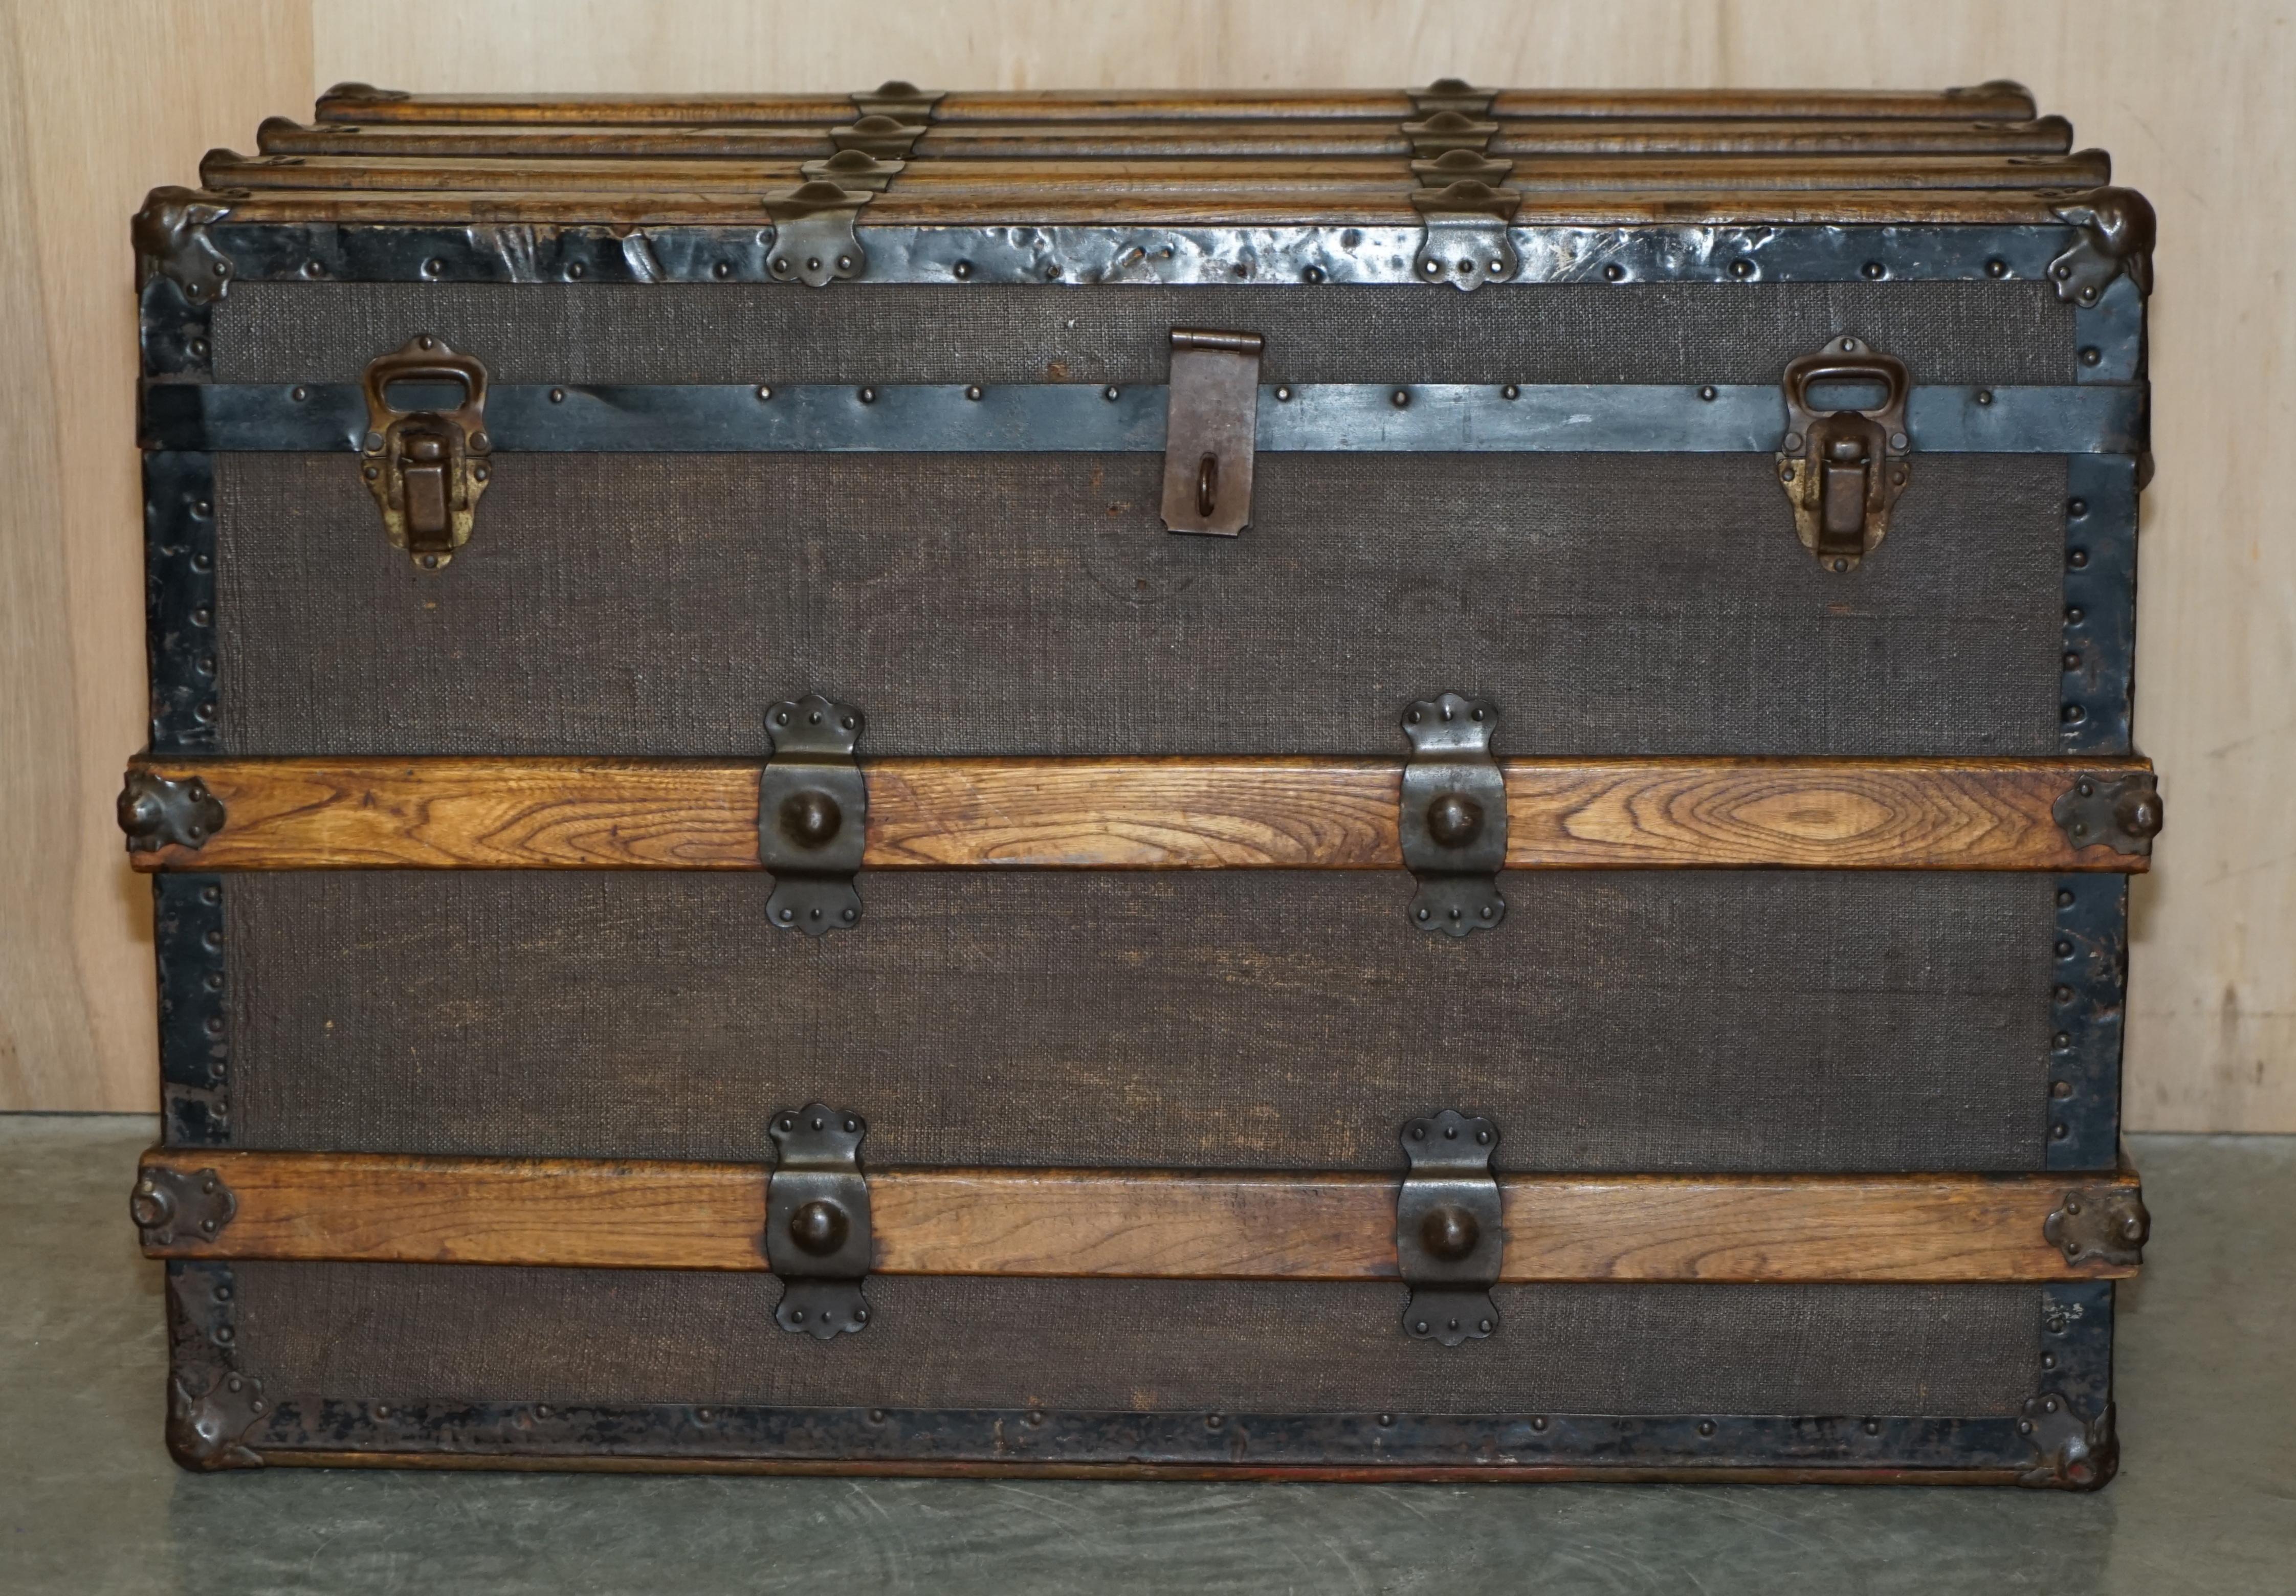 We are delighted to offer for sale this original circa 1880 English Elm strapped with Wrought Iron rivets, leather handled, canvas steamer trunk with period serial number 

This is a very well made example of a steamer trunk designed for luxury